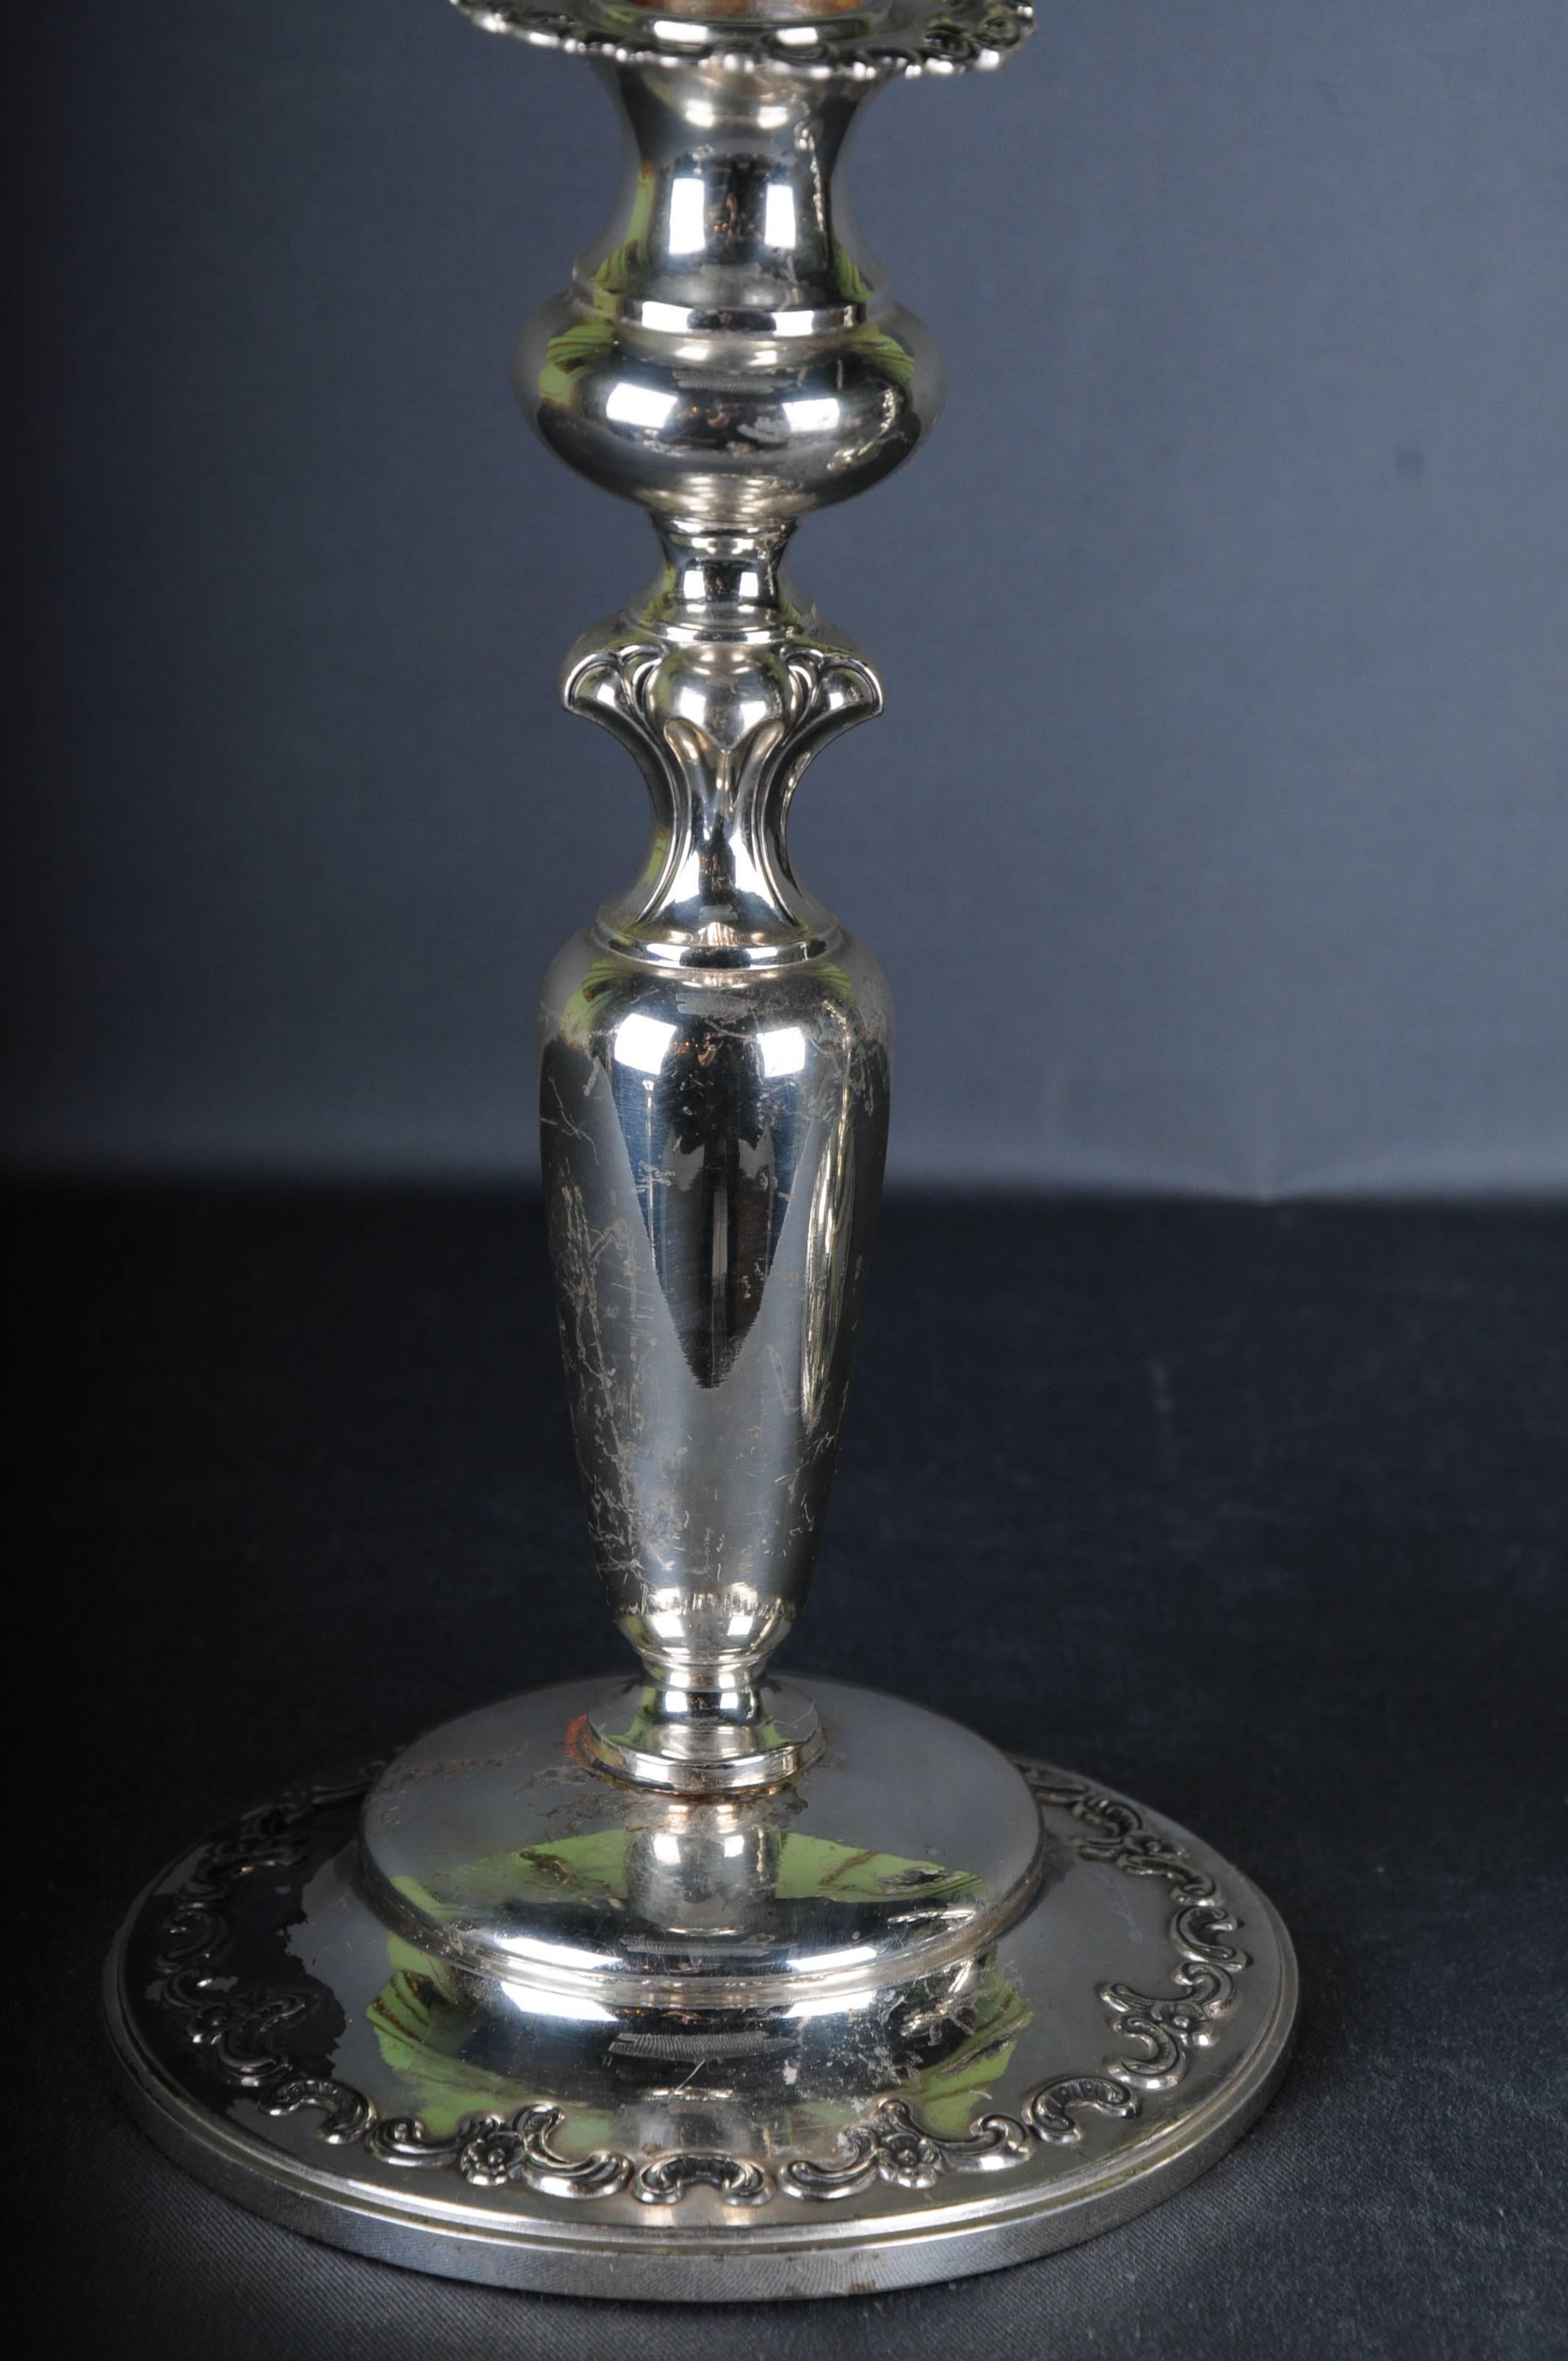 2 classic Silver Candlestick 925 Sterling Germany 

original Alt-Heidelberg 

Half moon and crown

The candlestick is weighted
Weight: 1146 g 

The condition can be seen in the pictures.